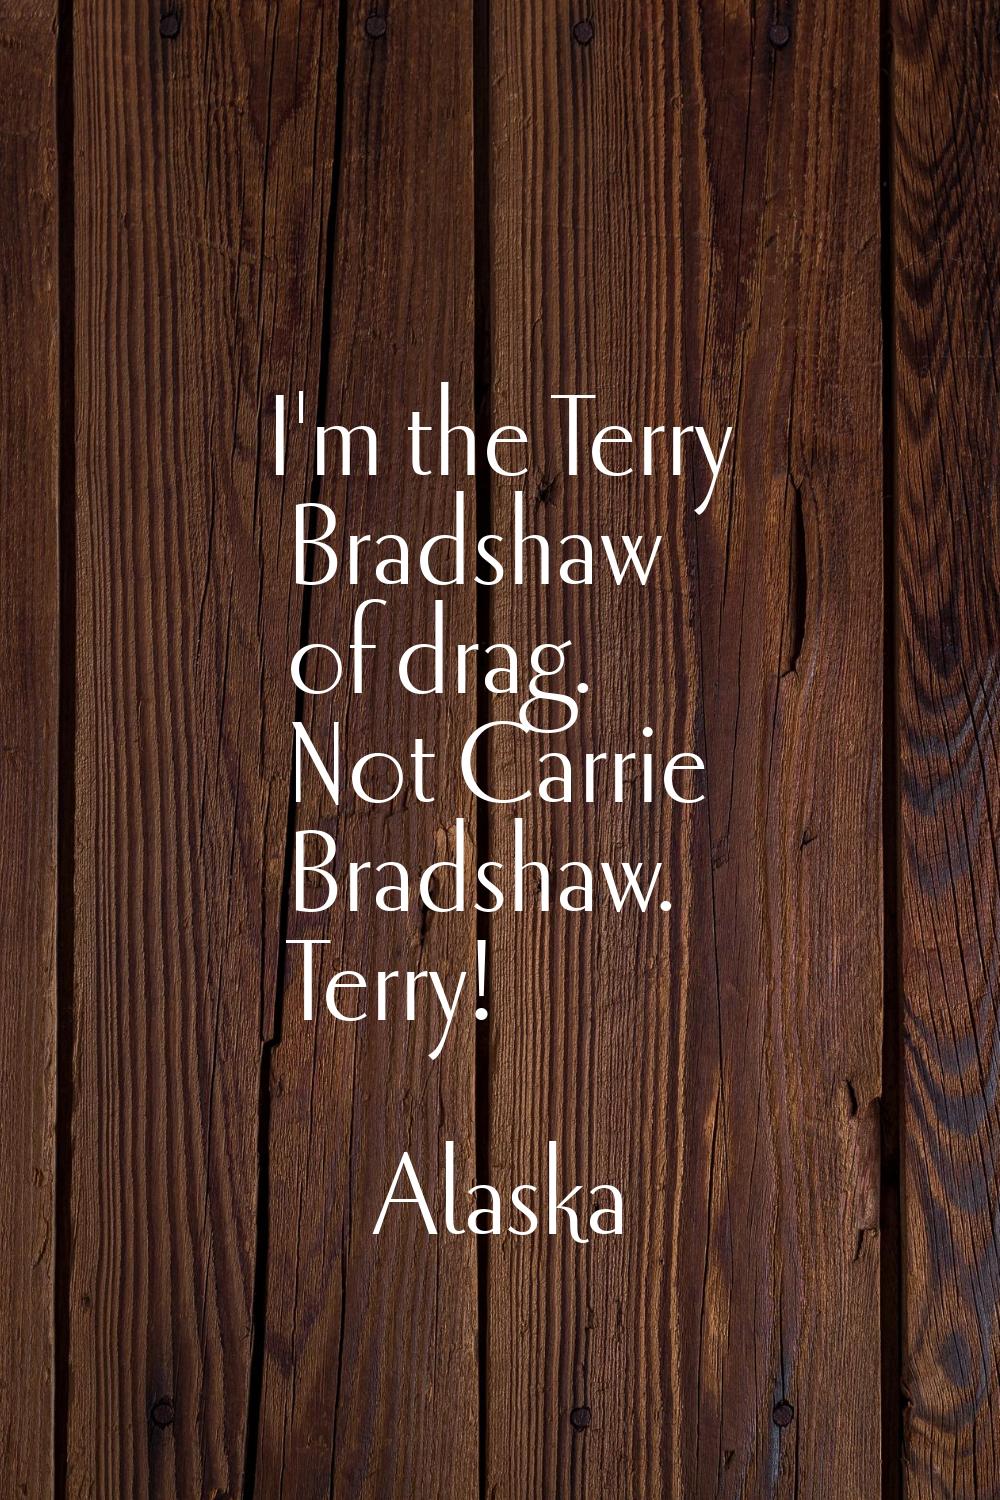 I'm the Terry Bradshaw of drag. Not Carrie Bradshaw. Terry!